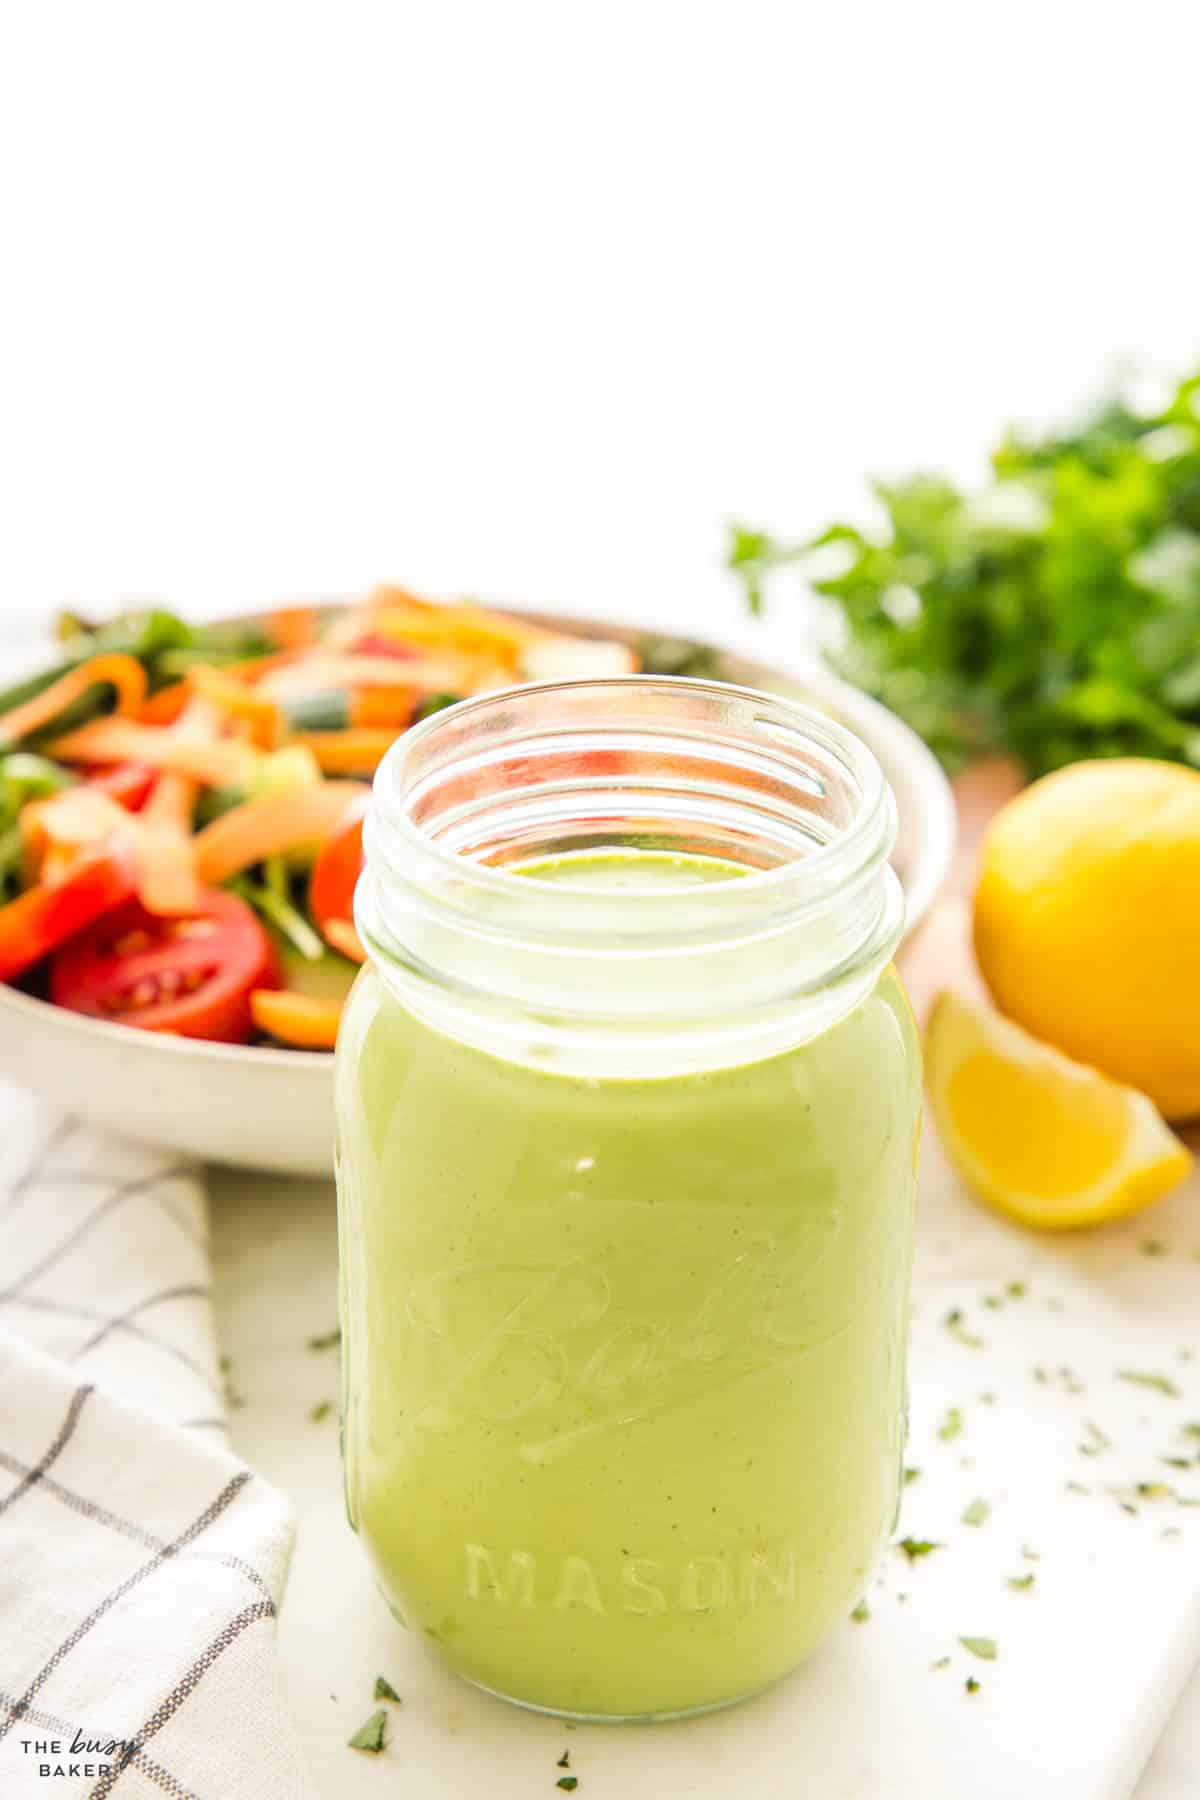 creamy salad dressing with herbs